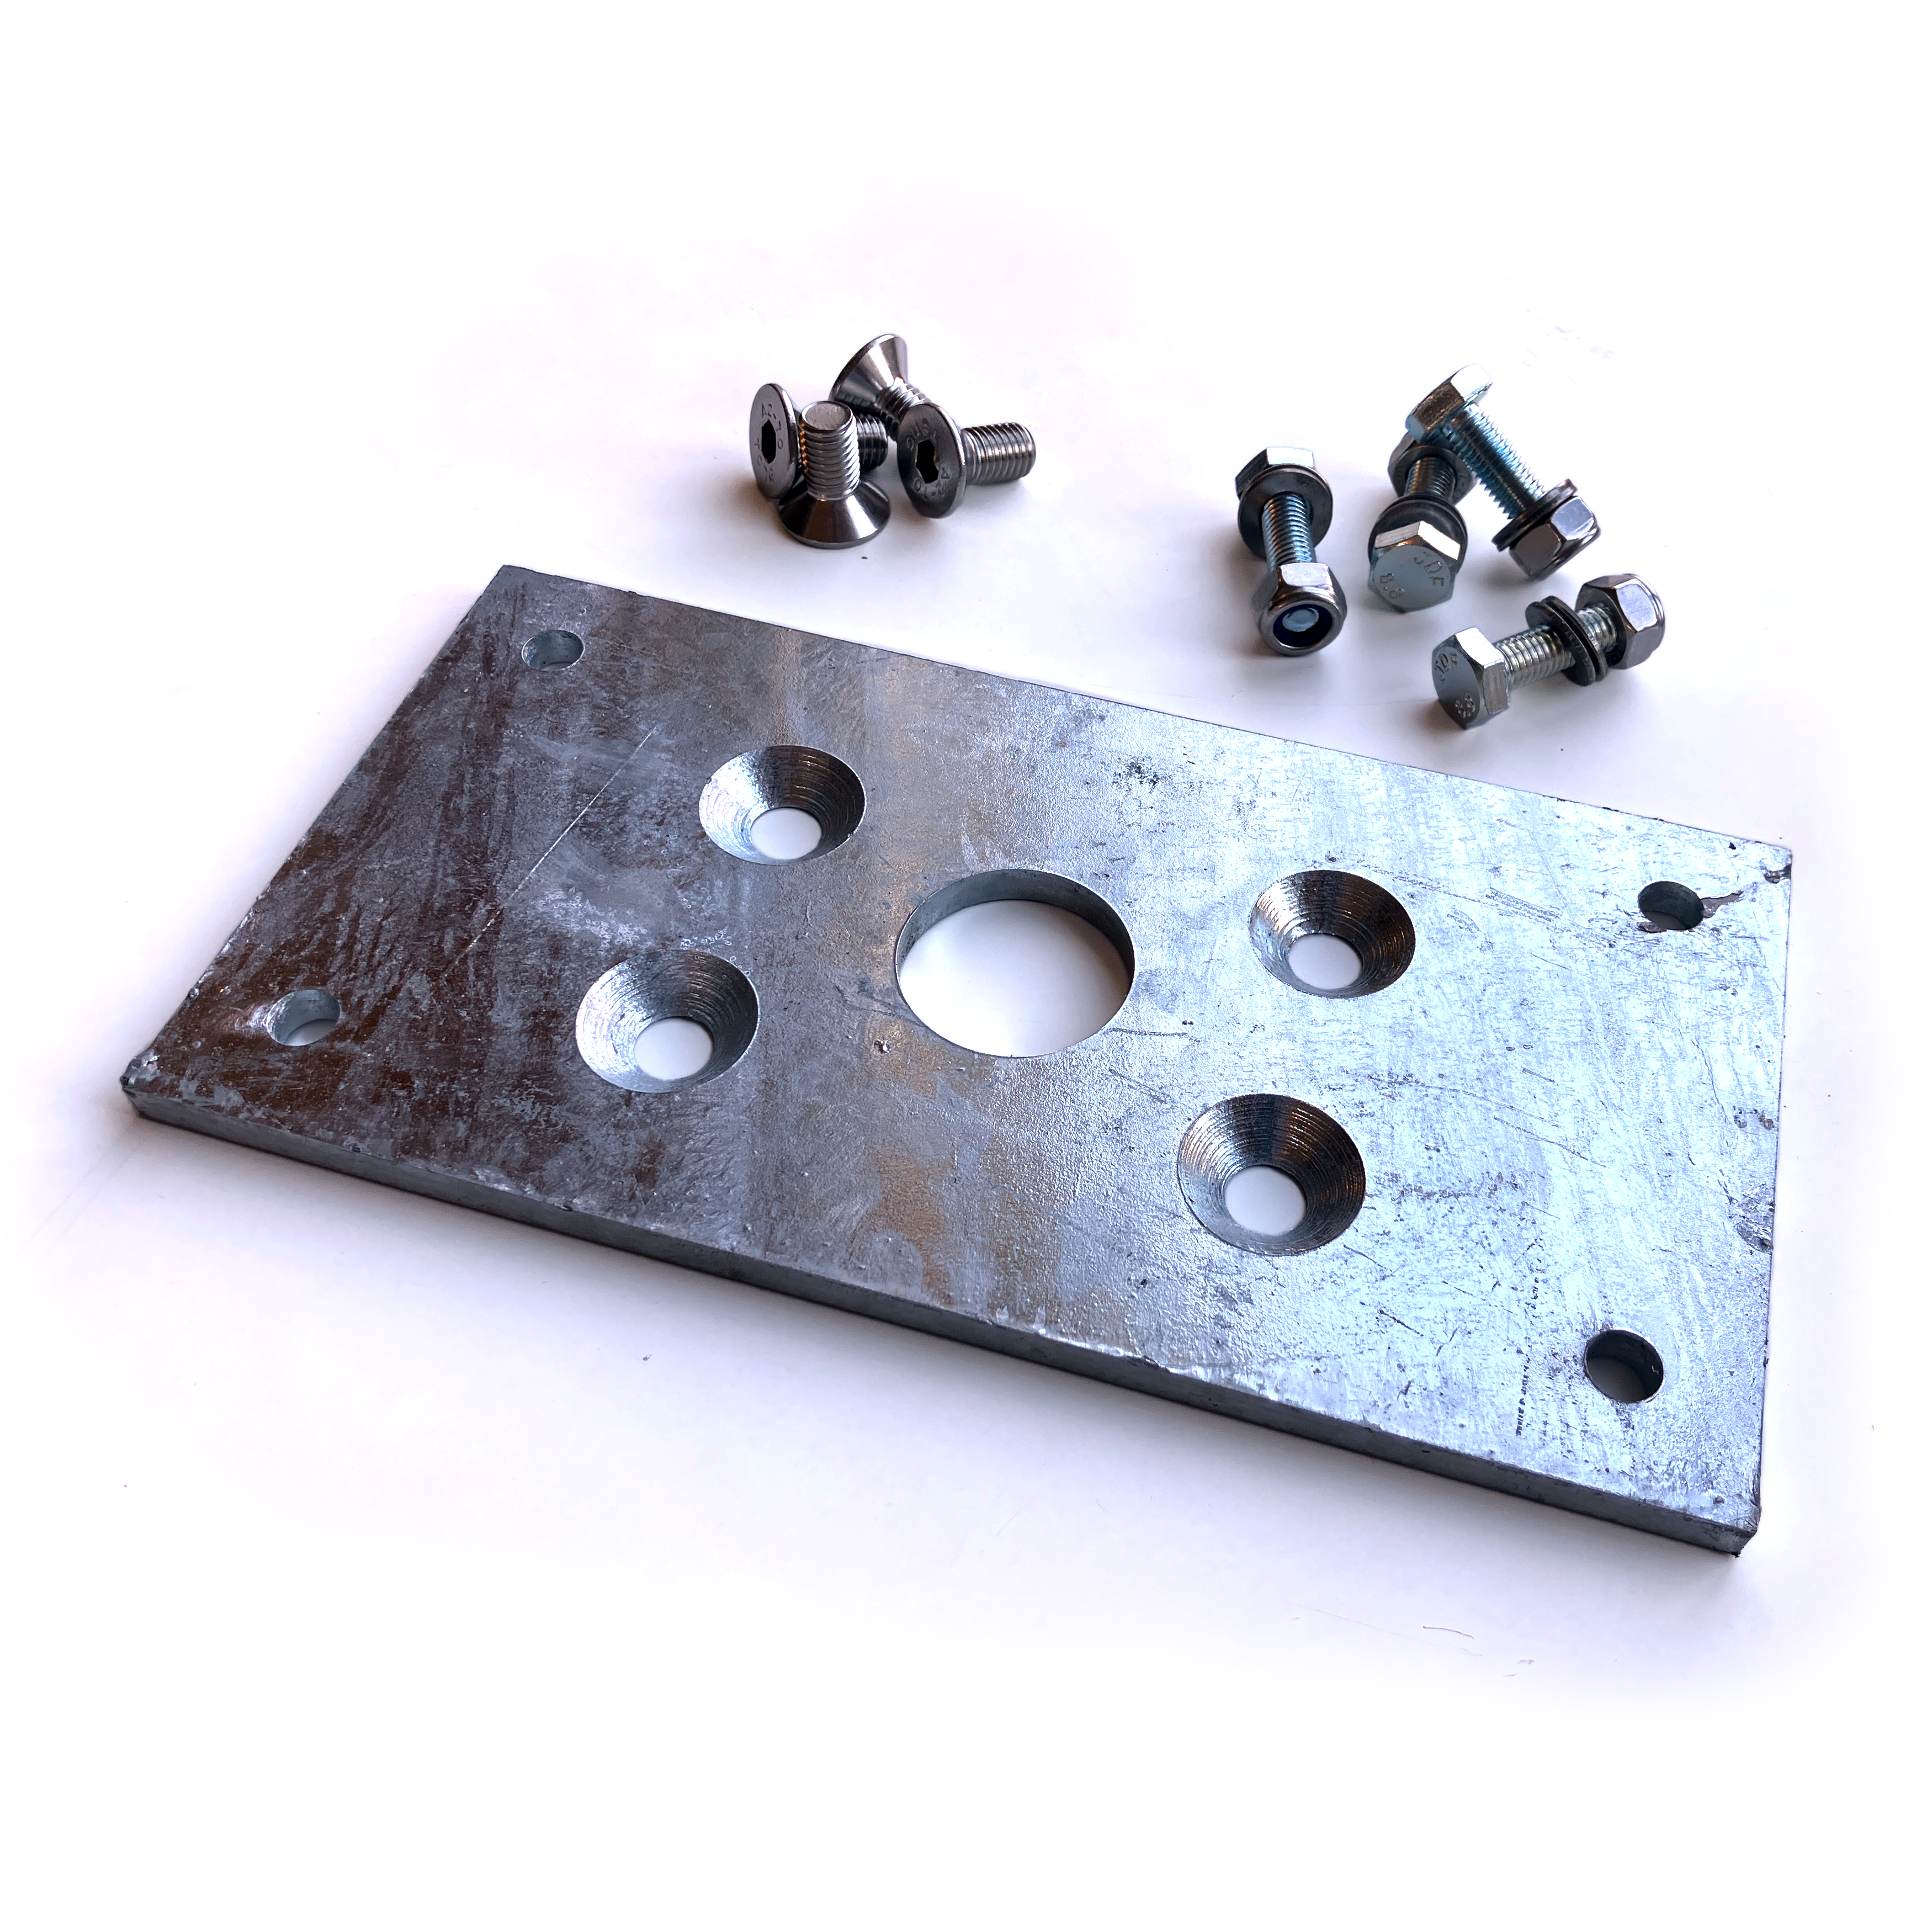 Bolt and weld adapter plate